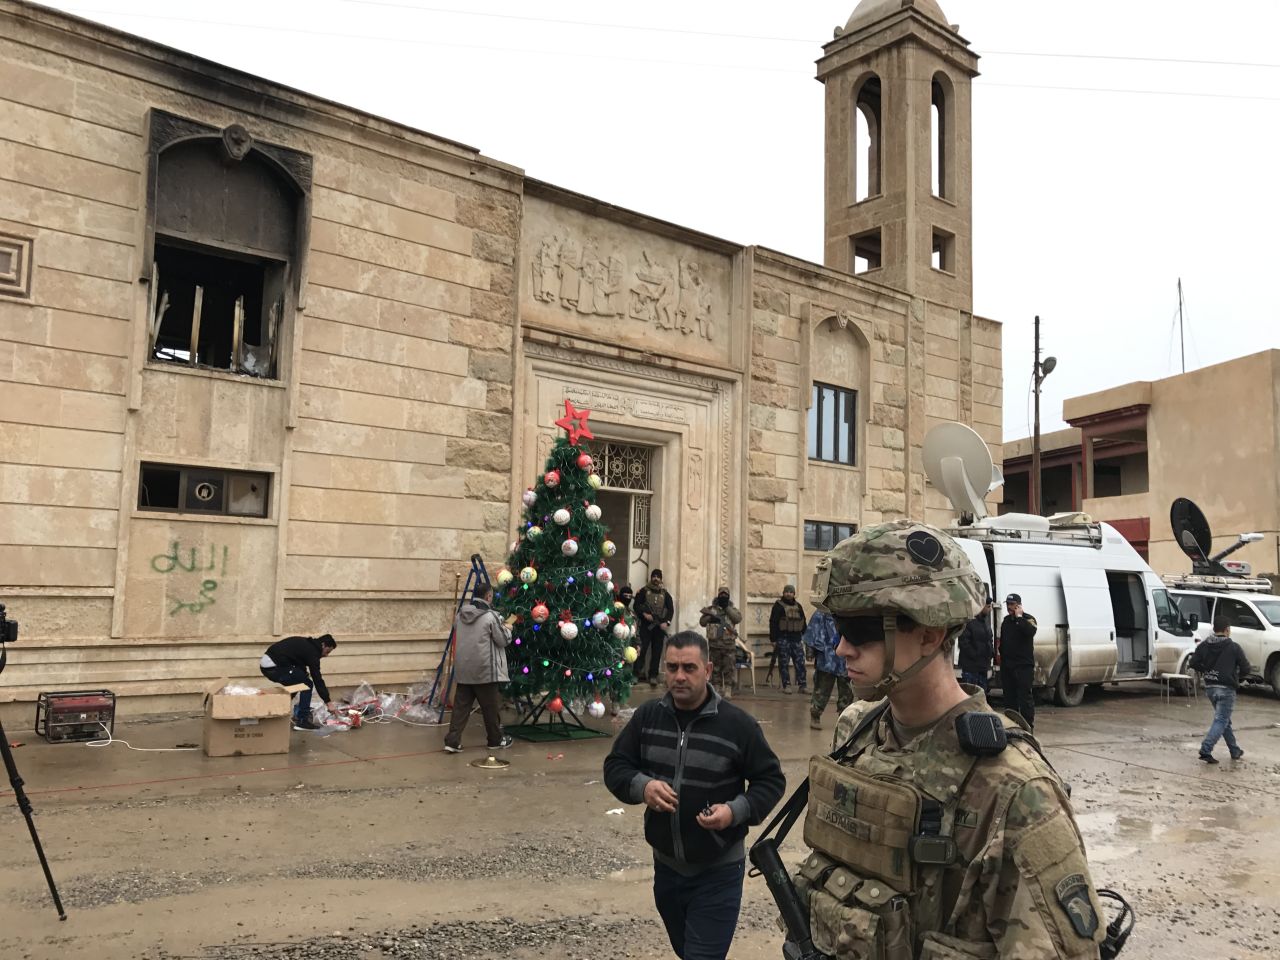 US and Iraqi security forces were on hand to protect churchgoers after ISIS reportedly made threats to attack Bartella.